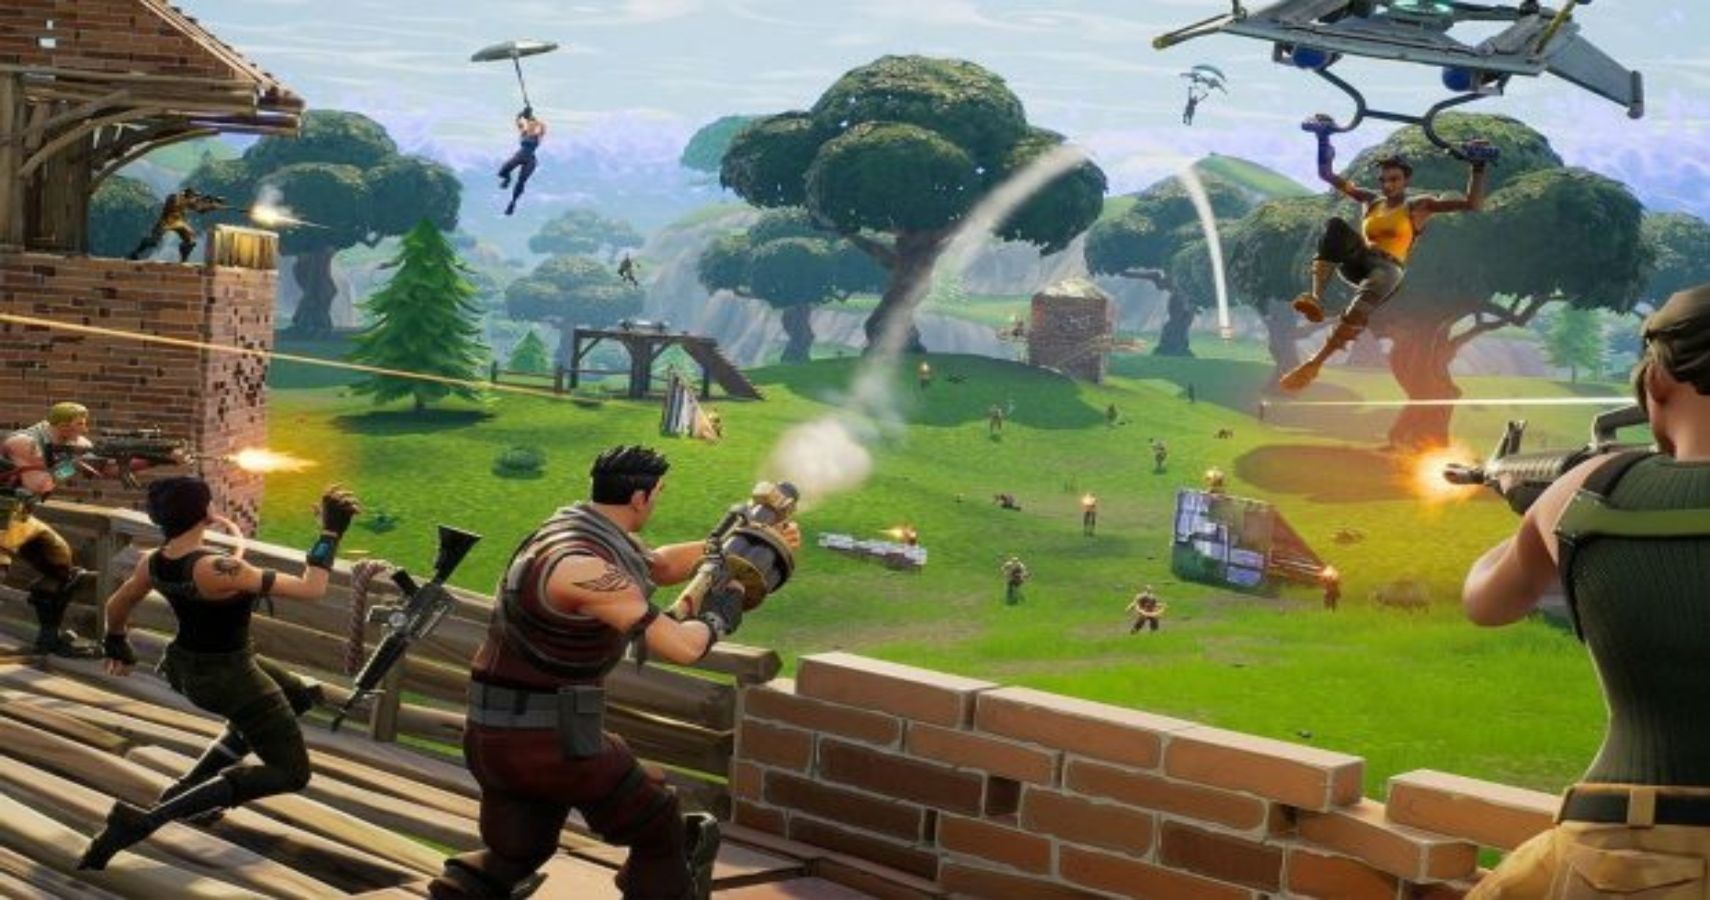 Epic Games Suing Organizers of Disastrous 'Fortnite' Festival